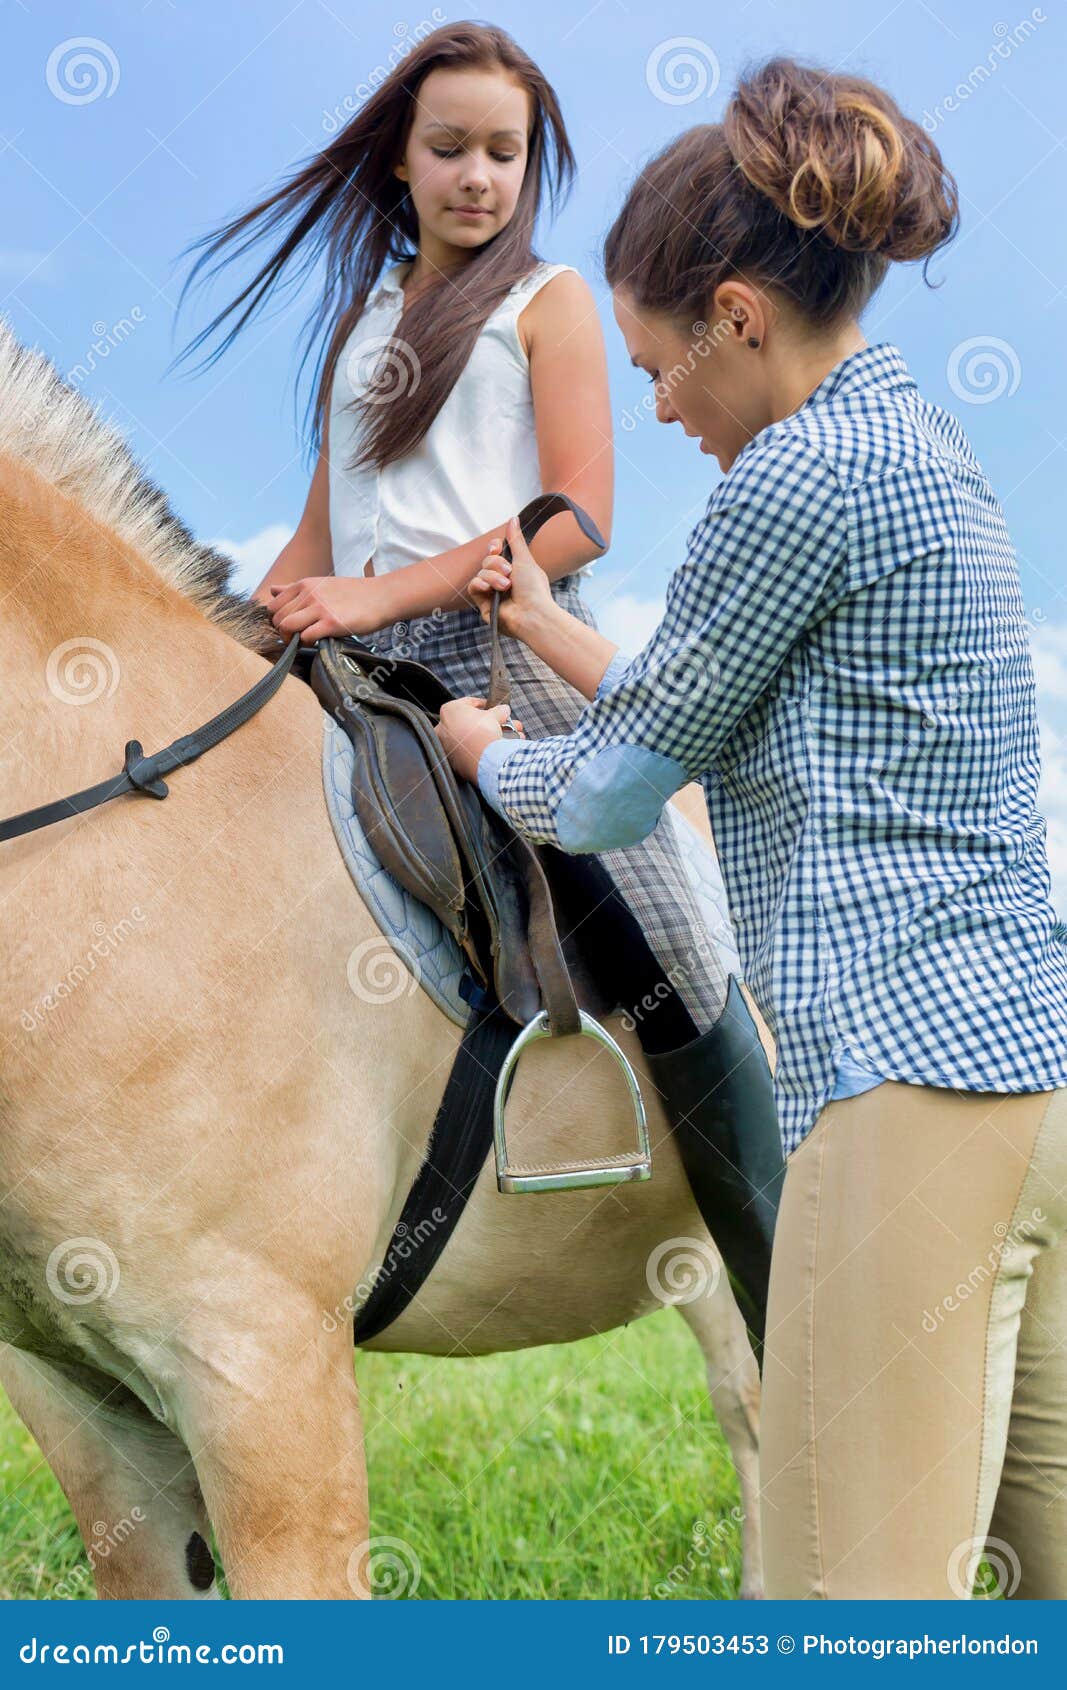 portrait of mature woman adjusting leathers on horse for stirrup iron in ranch